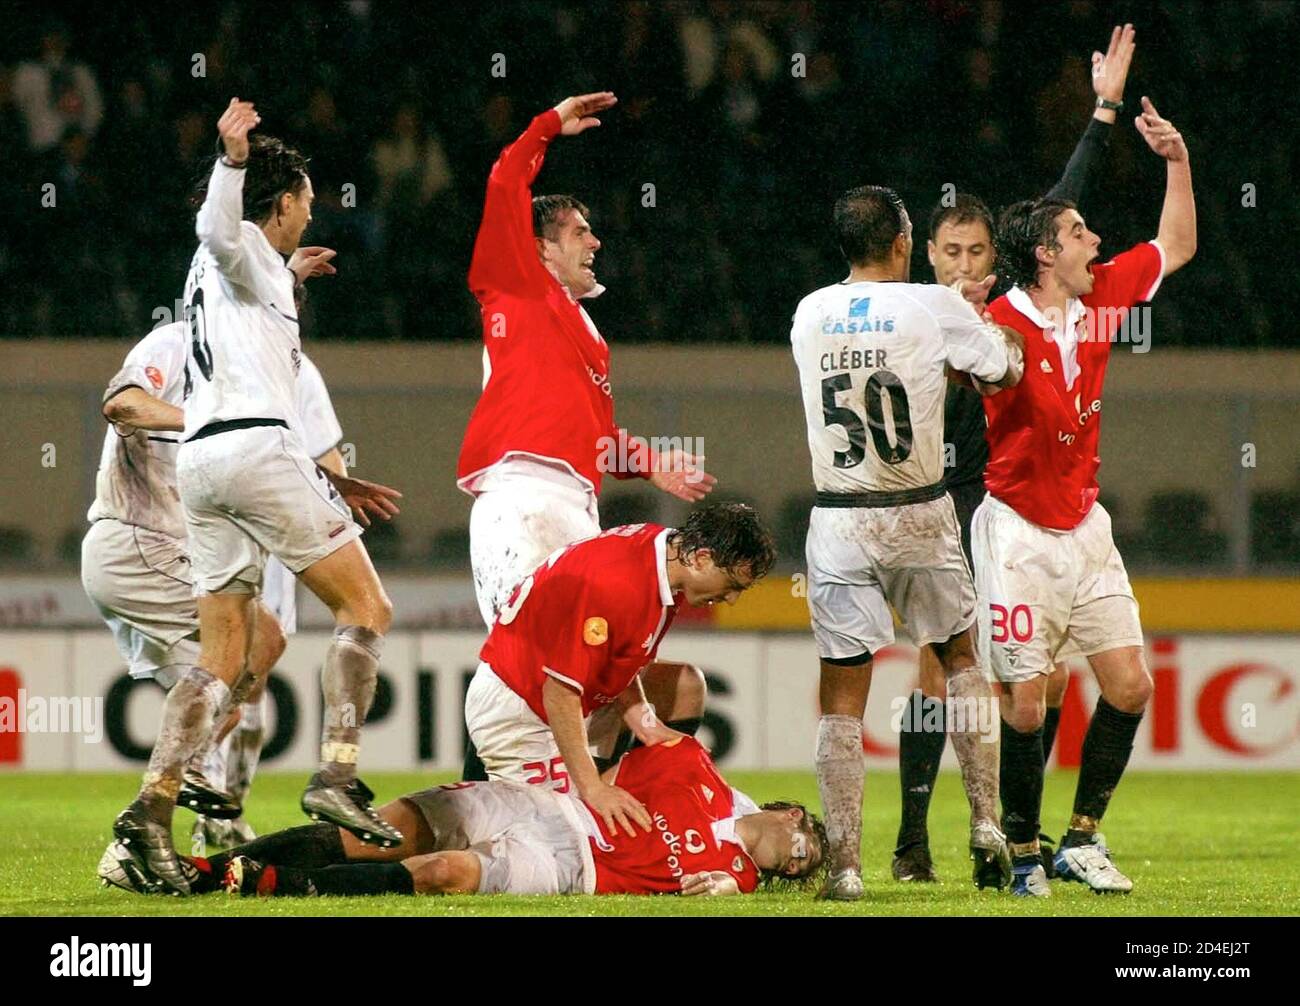 Players Wave Asking For Help For Benfica S Hungarian Soccer Striker Miklos Feher Ground During The Portuguese Premier League Match Held At The Guimaraes Stadium January 25 2004 Feher Died On Sunday After [ 1006 x 1300 Pixel ]